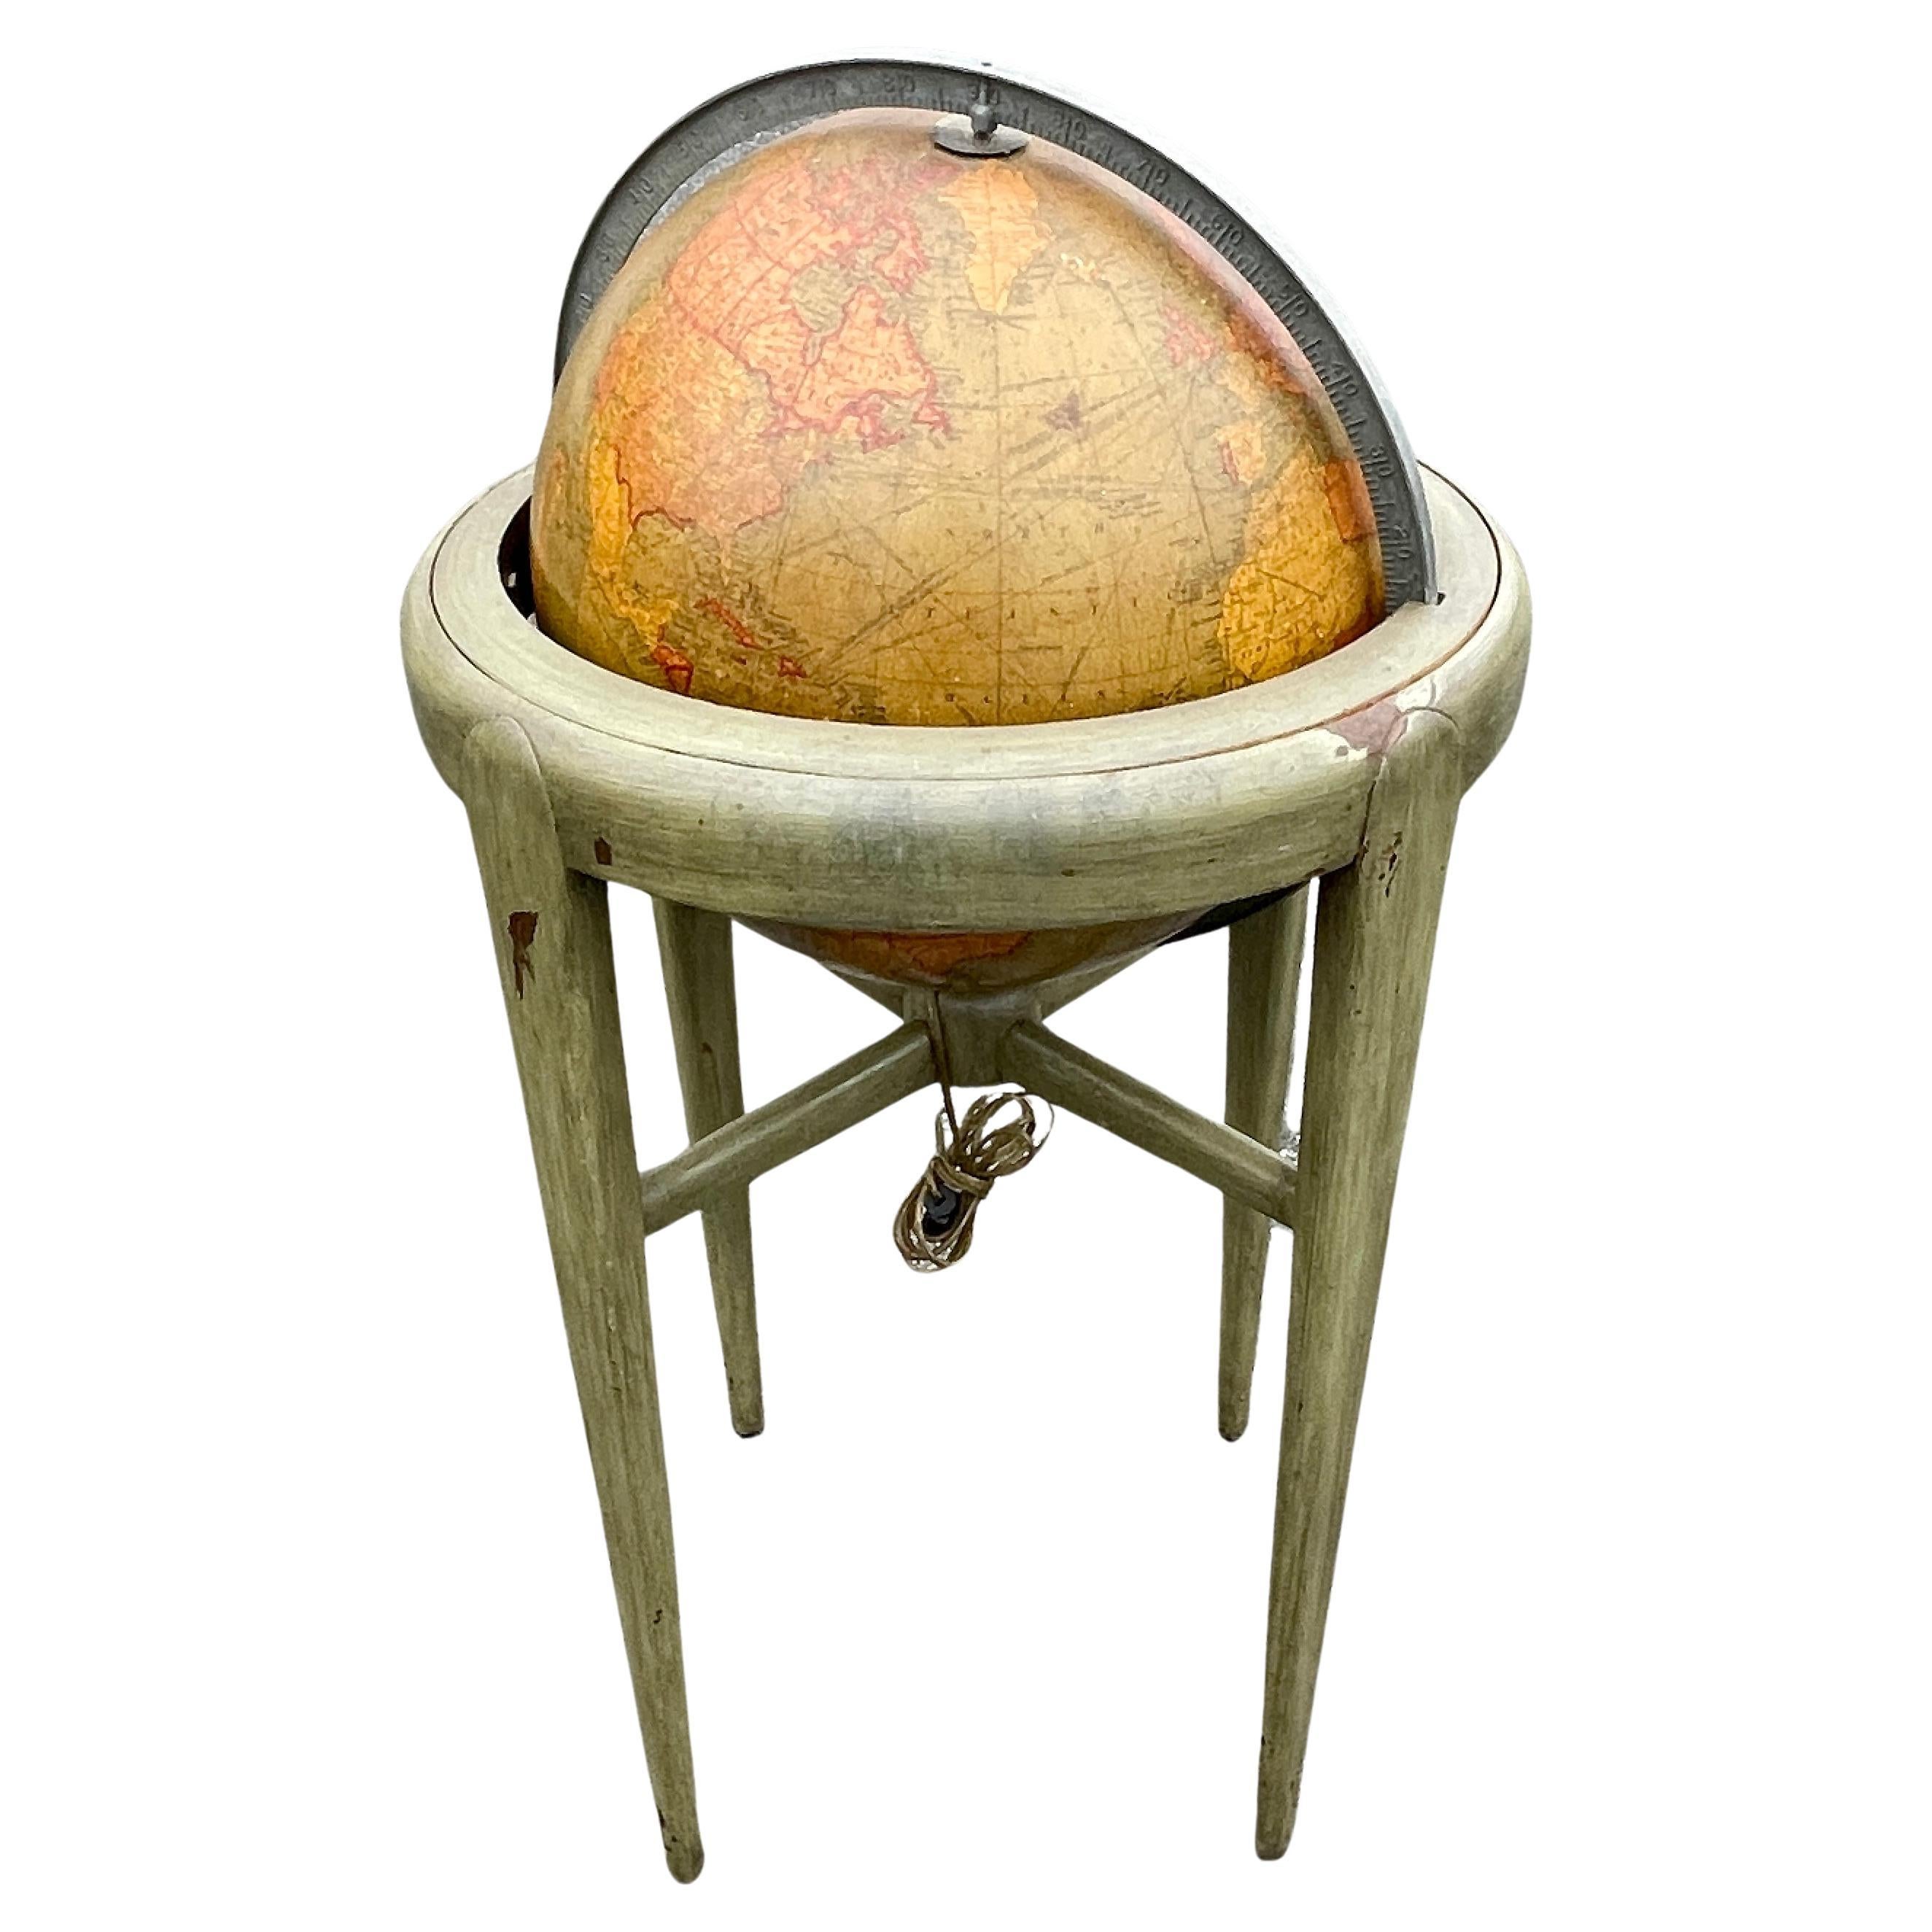 American 1950's back light green painted floor globe by Replogle, Mid-Century Modern.
Remarkable and charming Chicago made world globe featuring an internal light resting on a hand painted wood base in great vintage condition.
Please note that we